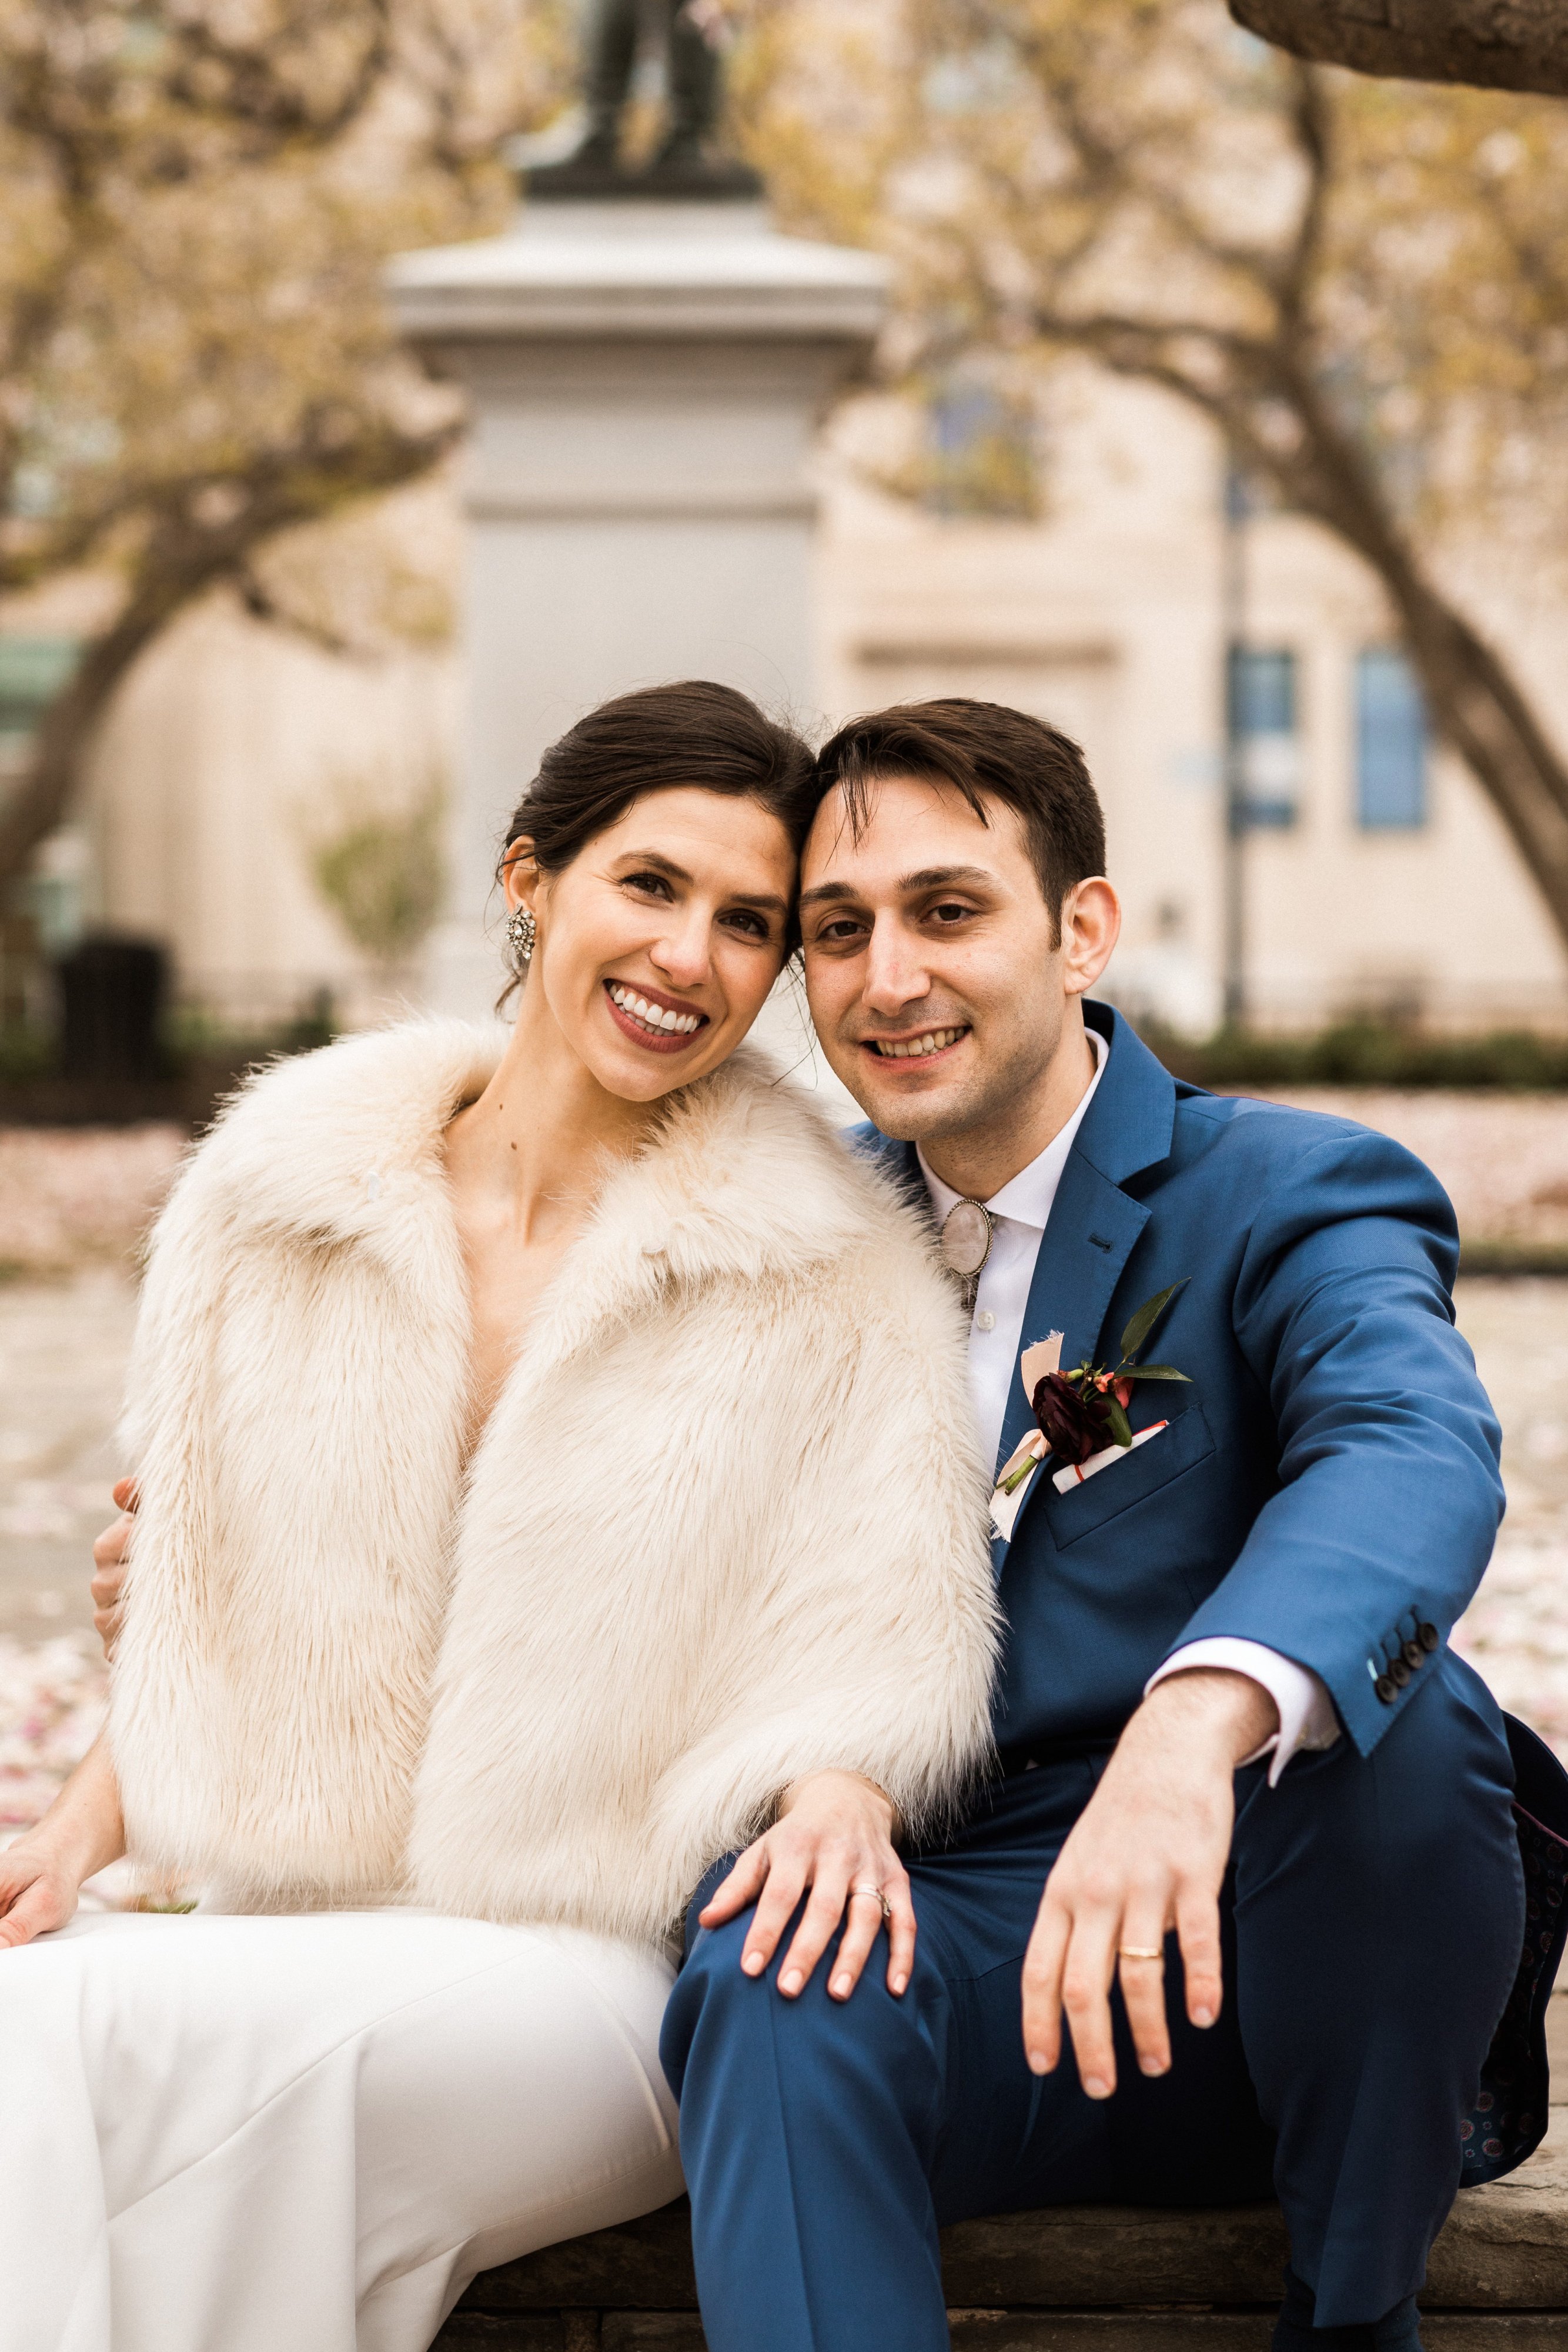 Caroline Wood and Chris Proto's elopement in Rawlins Park, Washington, DC March 21, 2020. Following recommendations from the CDC regarding social distancing to prevent the spread of COVID-19, Caroline and Chris made the difficult decision to postpone their